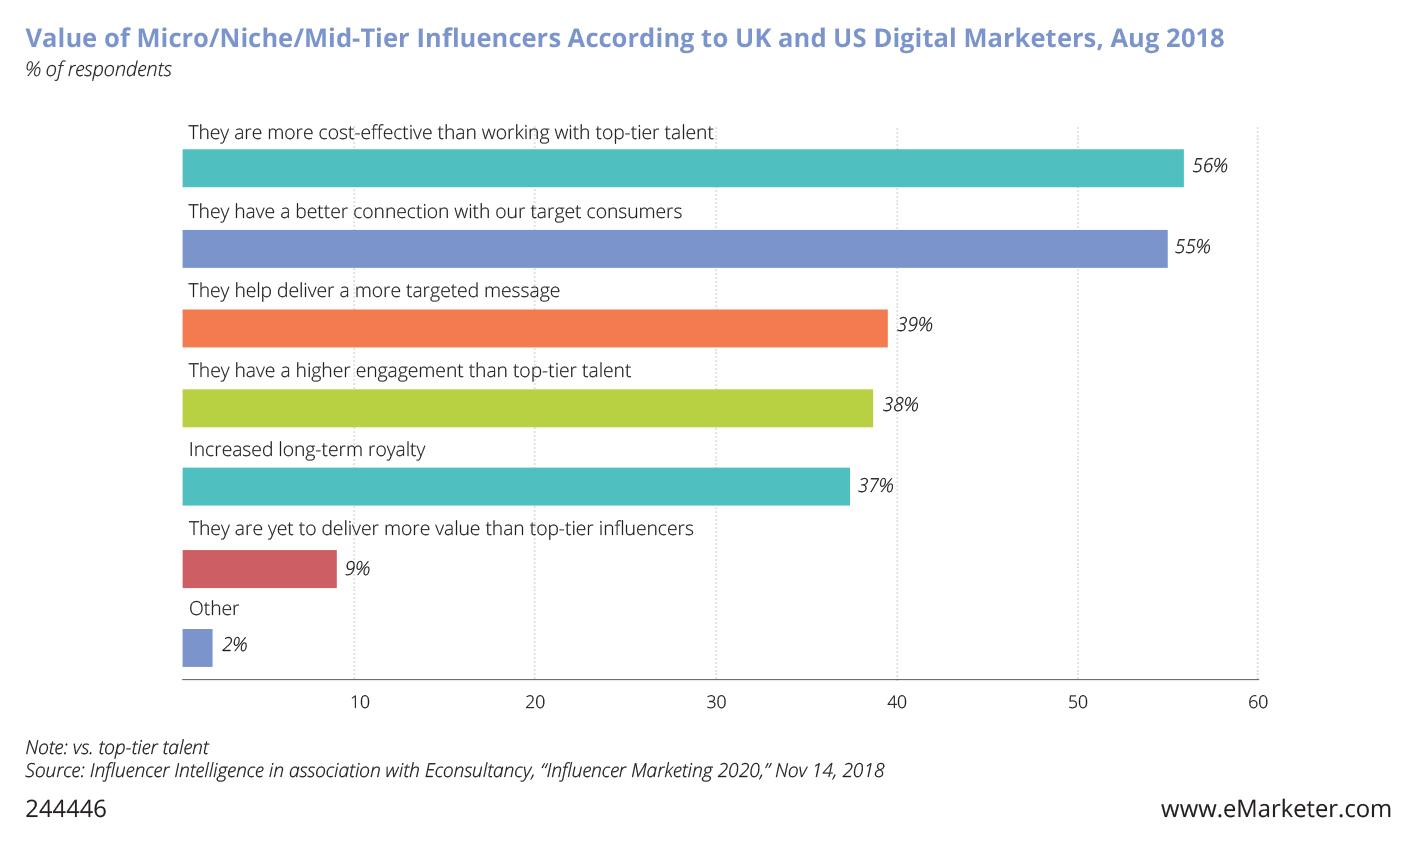 Chart: Value of micro/niche/mid-tier social media influencers according to the UK and US digital marketers.